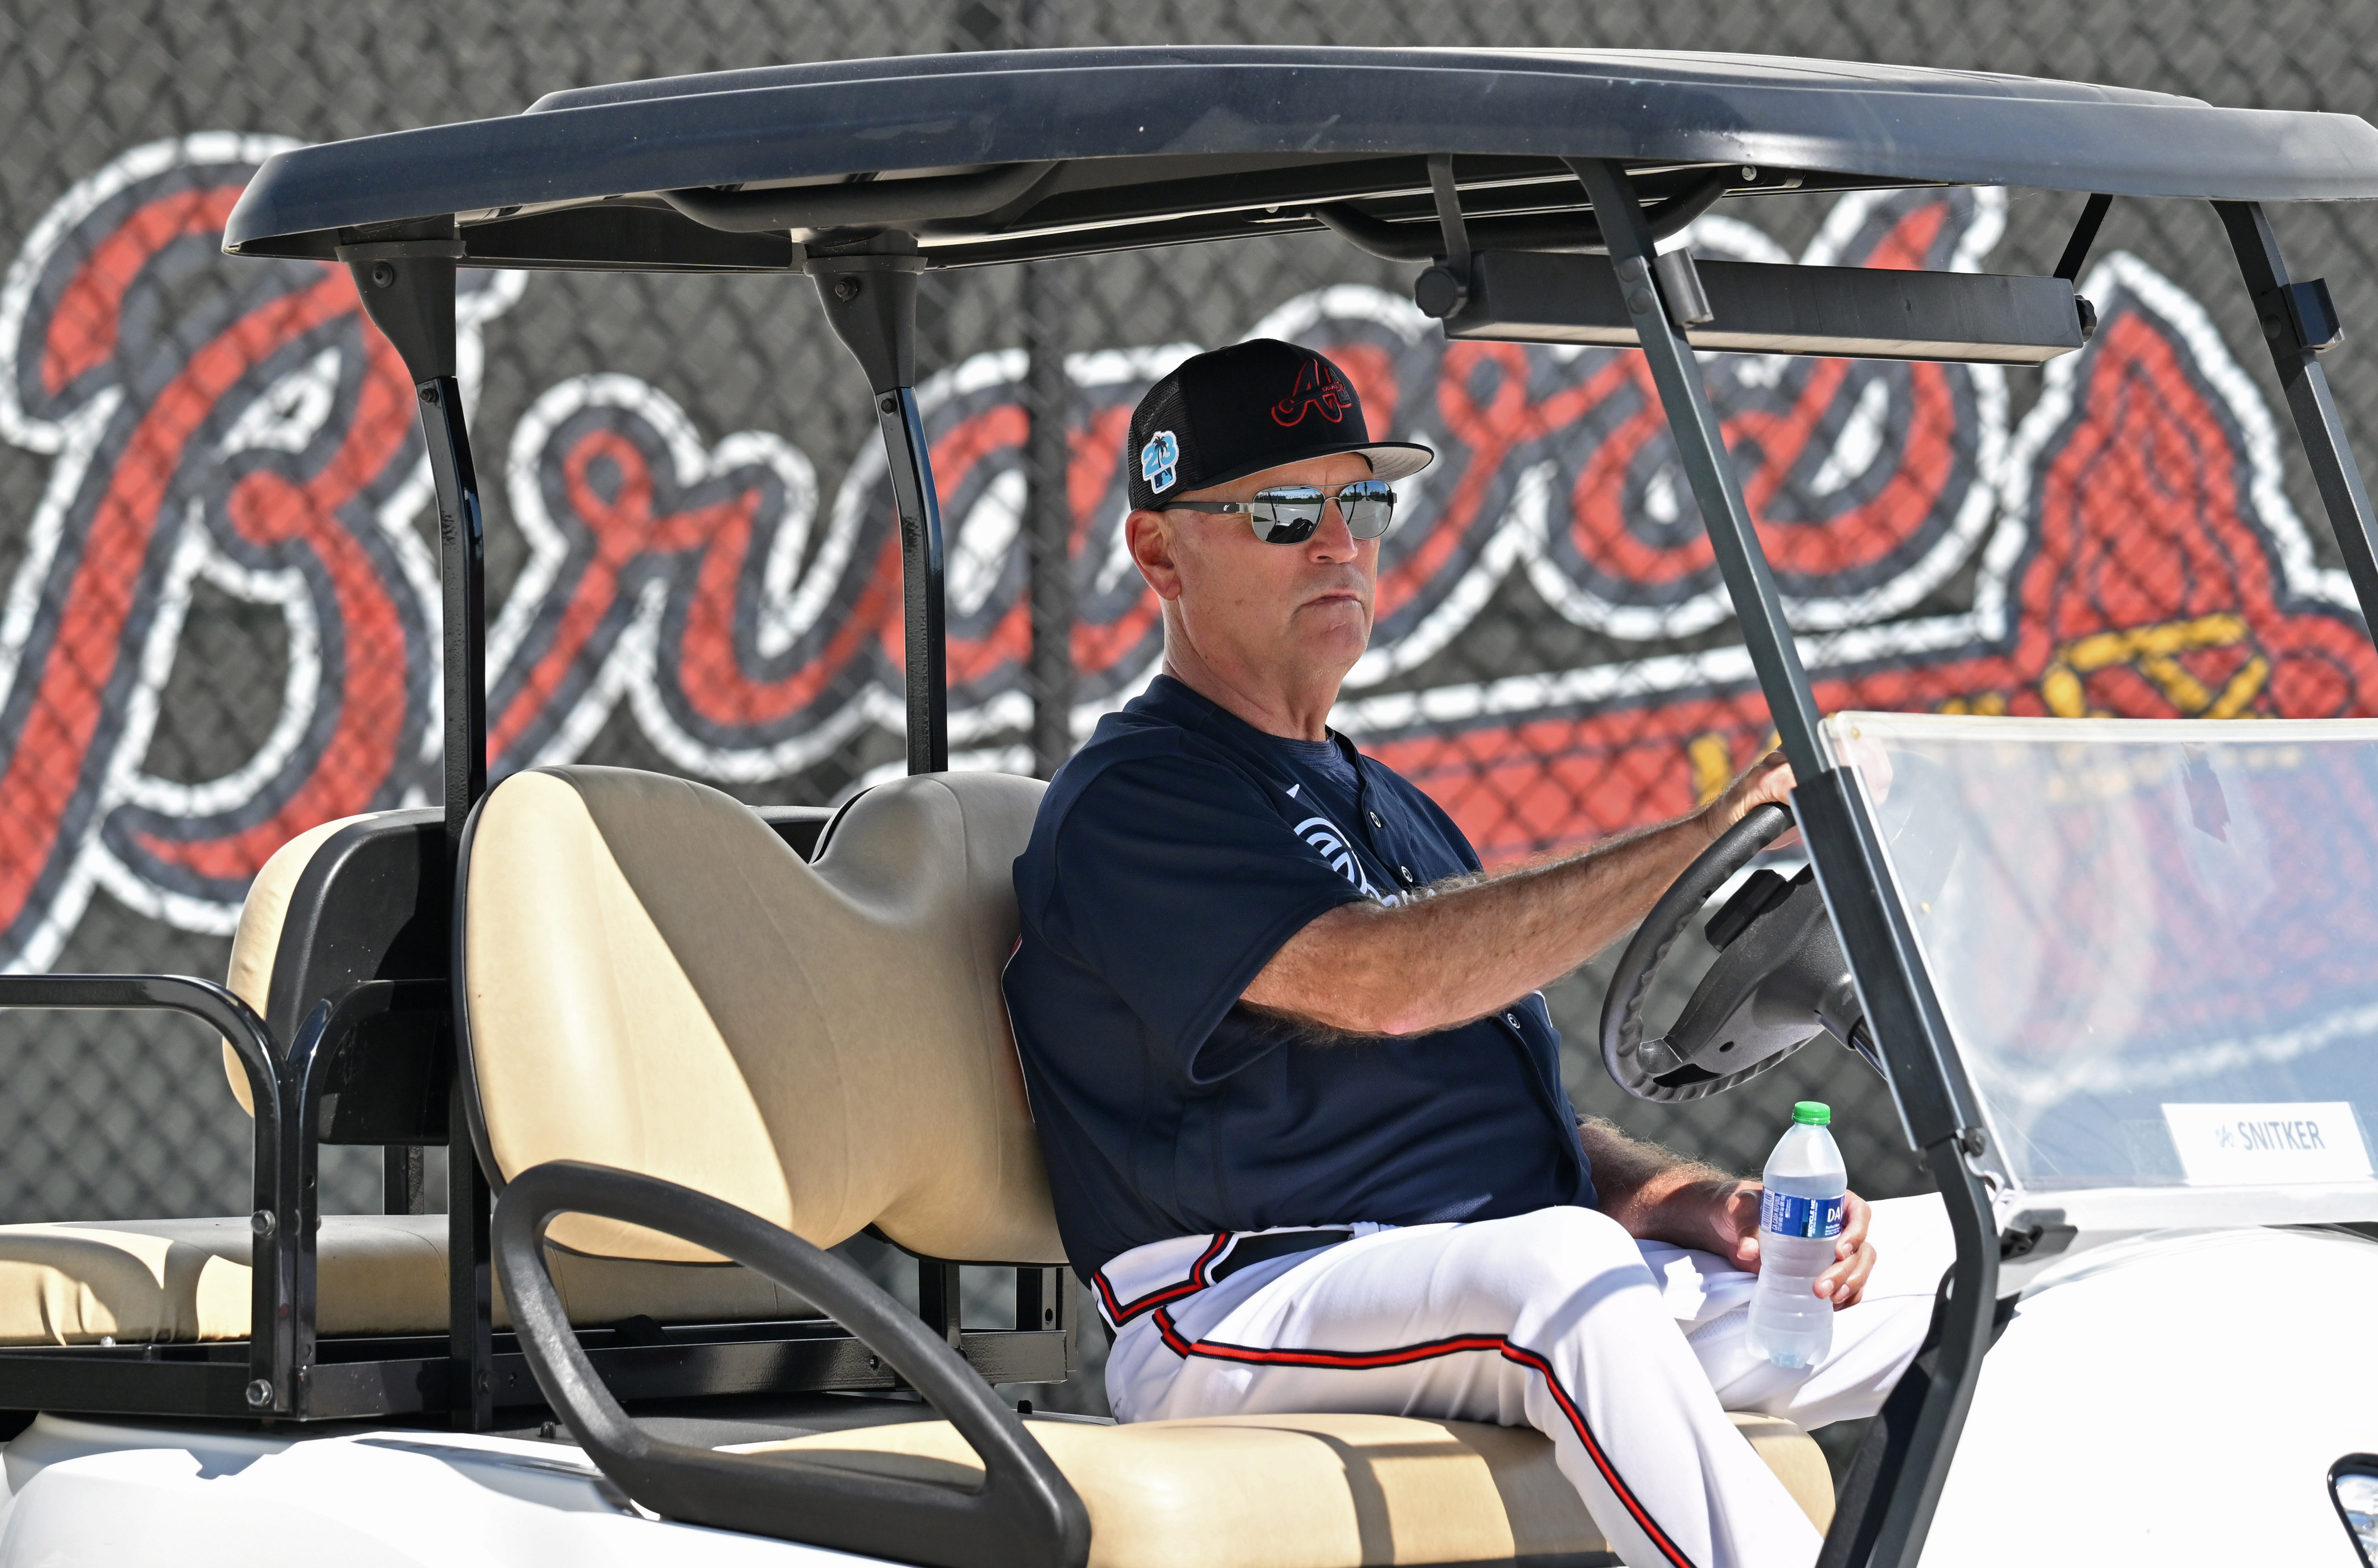 Nick Anderson, Michael Tonkin will make Braves Opening Day roster